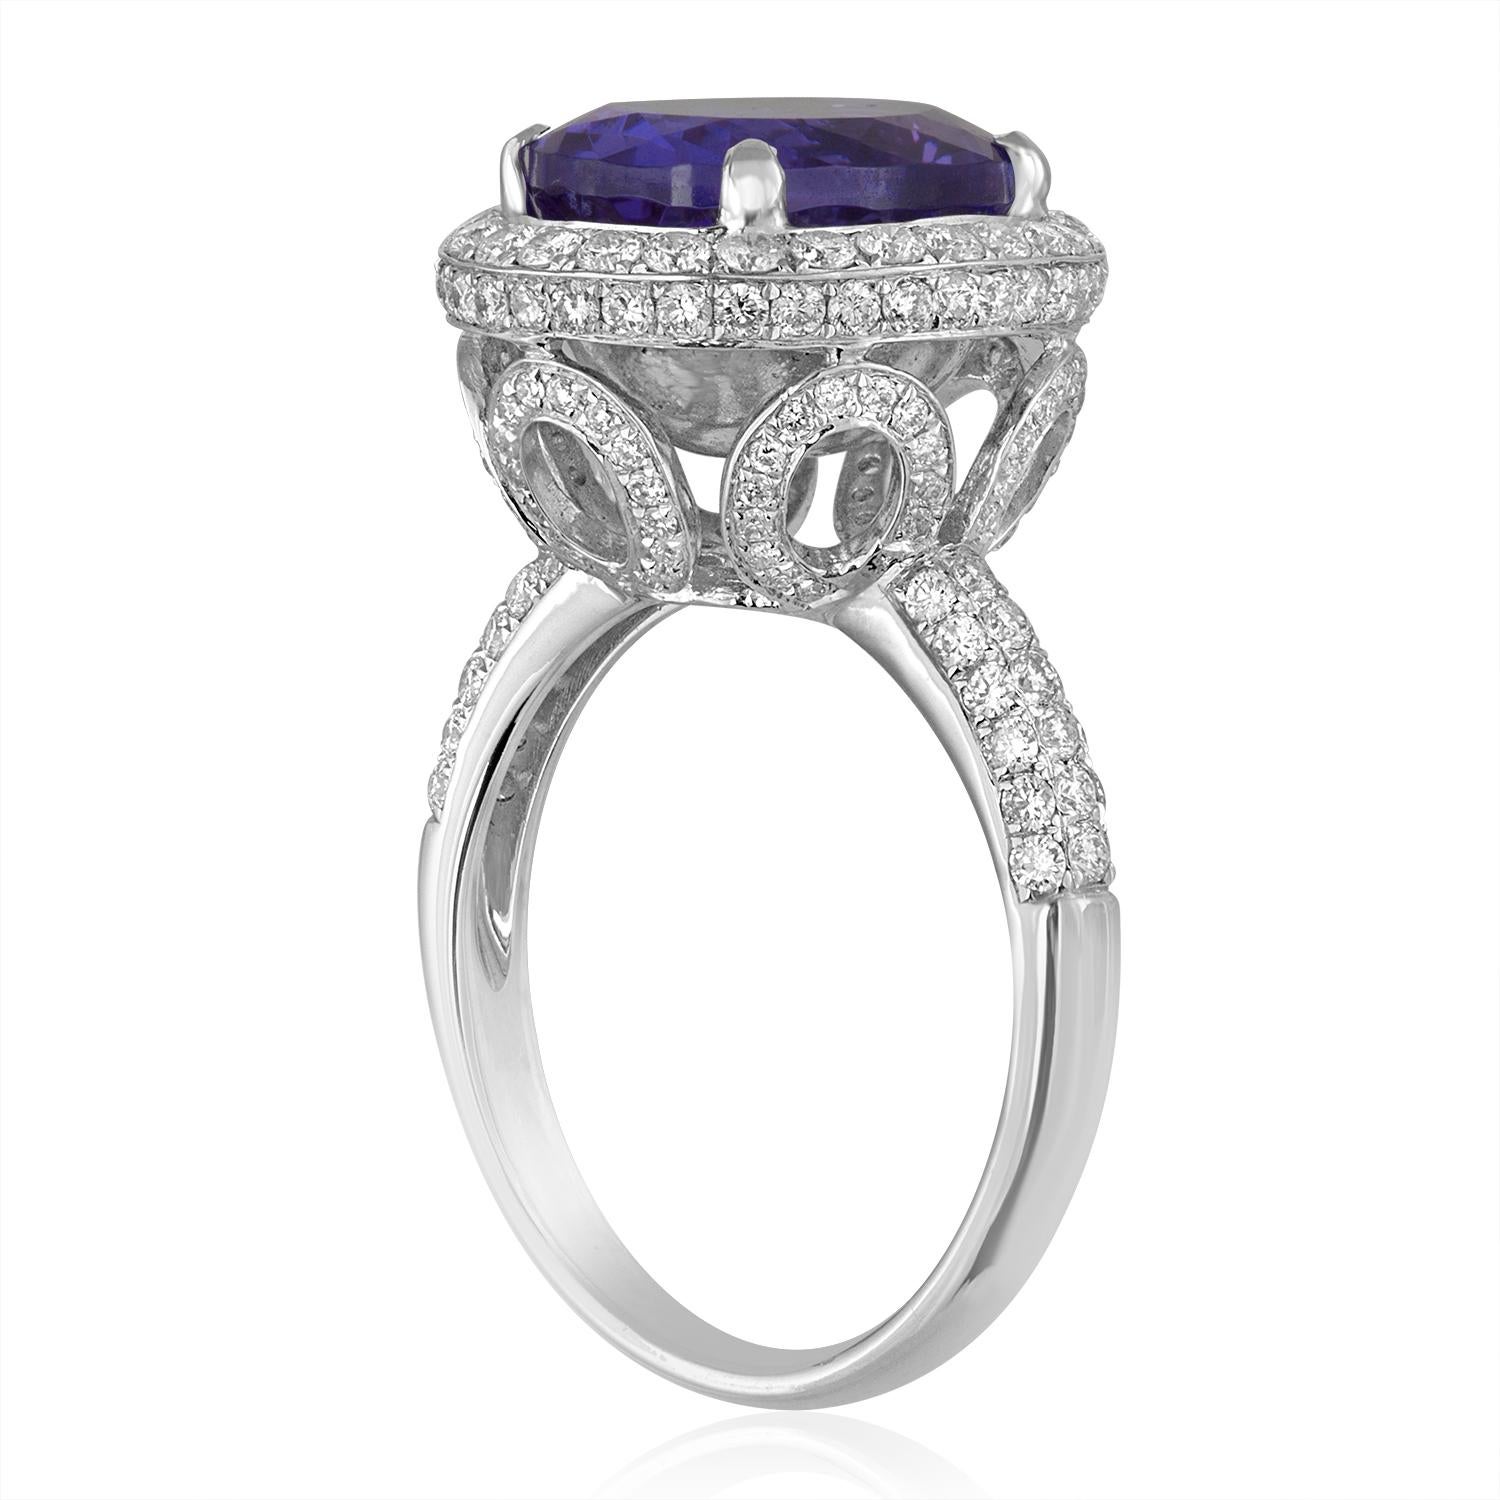 Stunning Tanzanite Ring
The ring is 18K White Gold
There are 1.50 Carats in Diamonds F VS
The center stone is 5.83 Carats Oval Tanzanite
The ring is a size 6.75, sizable.
The ring weighs 7.0 grams.